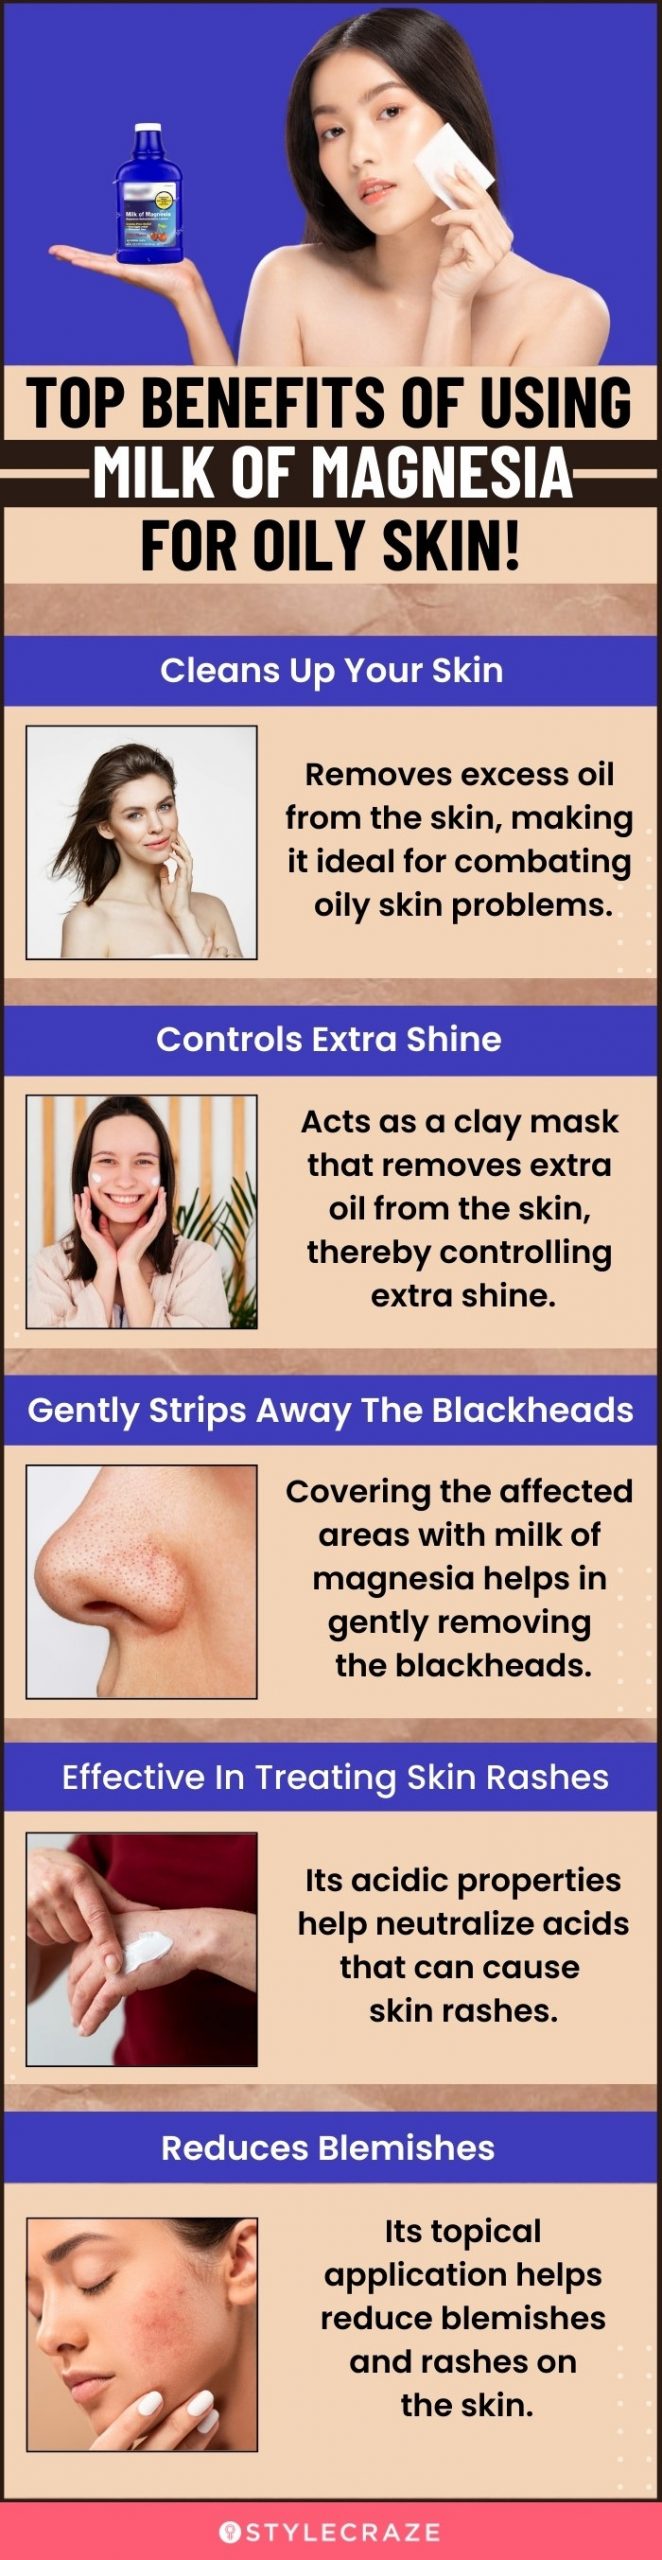 top benefits of using milk of magnesia for oily skin (infographic)